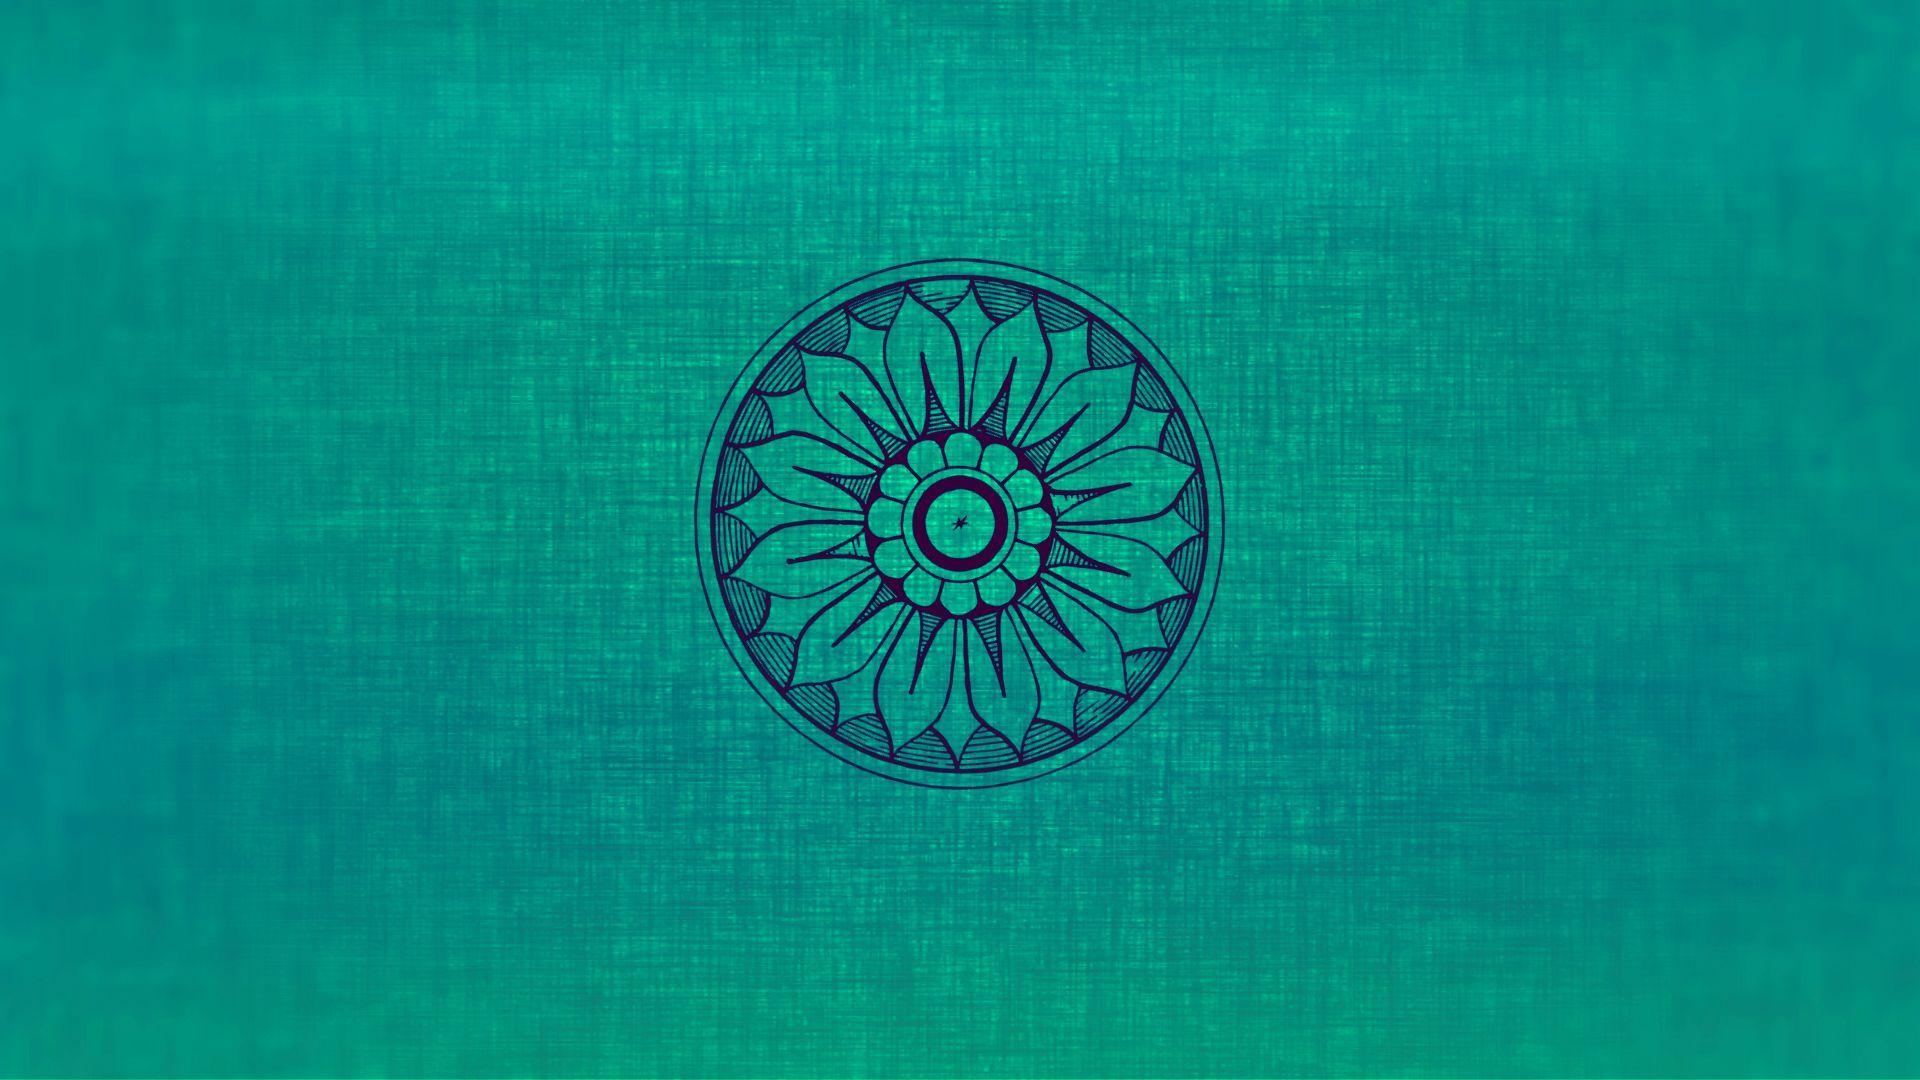 Turquoise Wallpaper Pack 17: Turquoise Wallpaper, 47 Turquoise